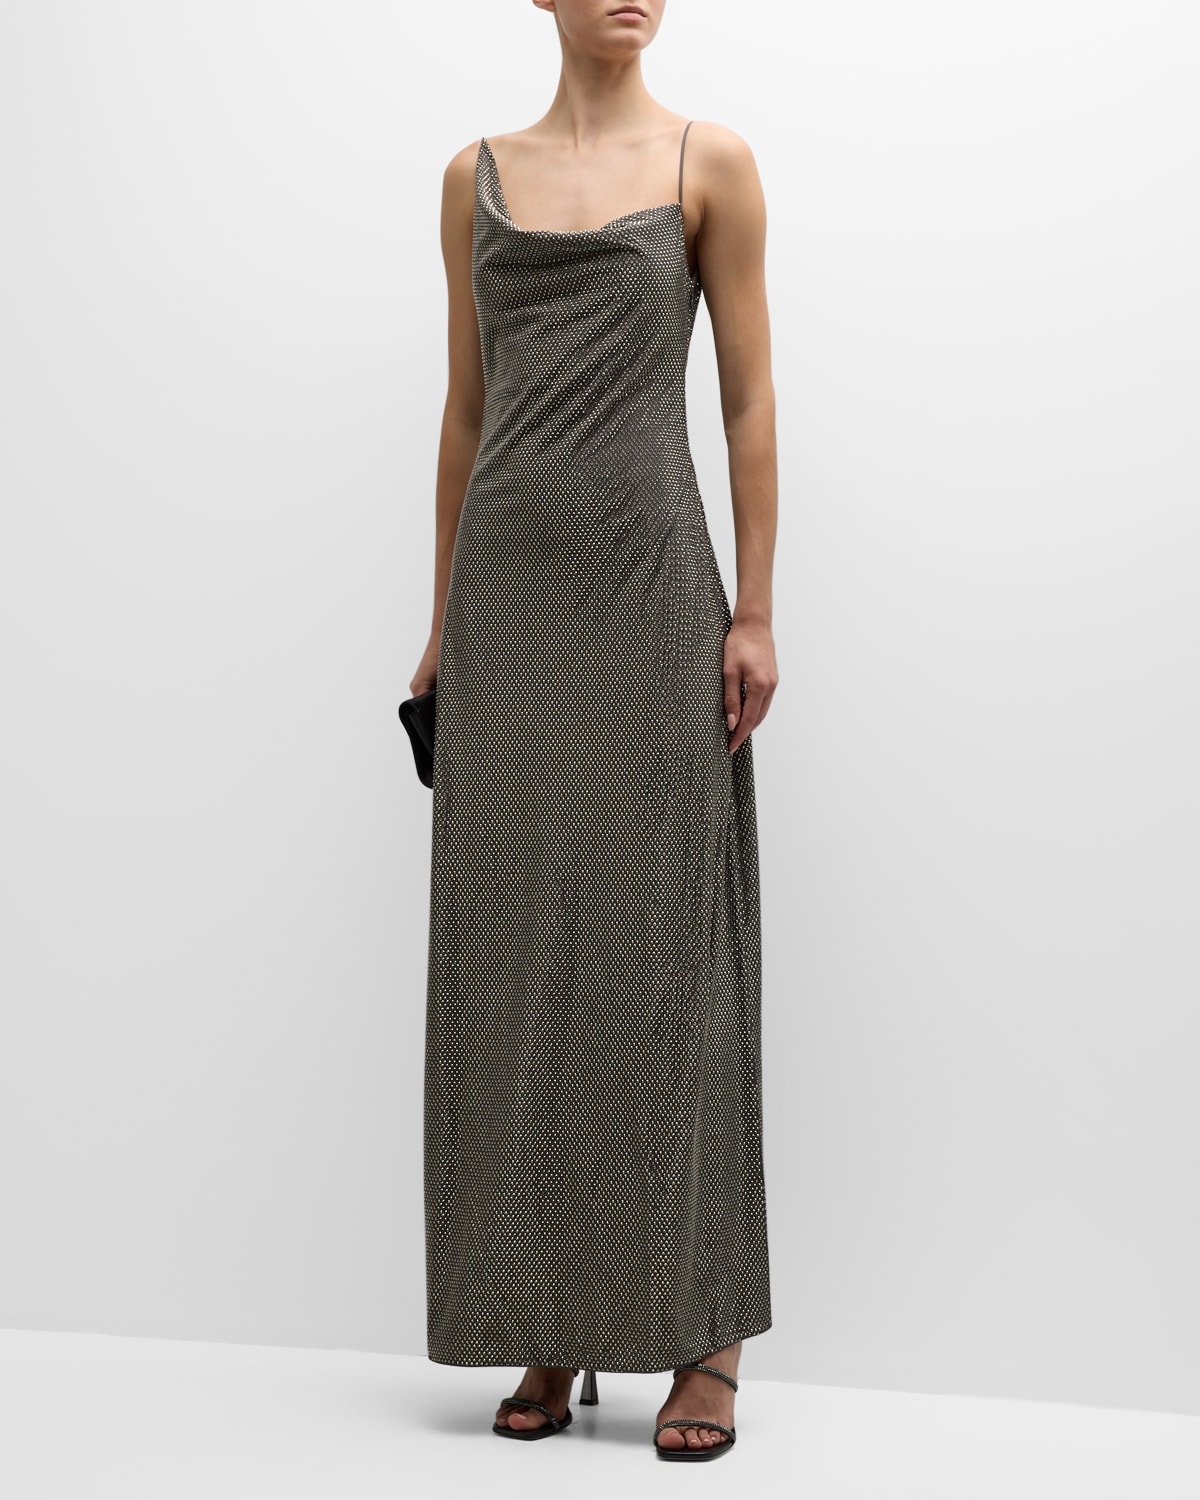 Crystal Cowl Neck Gown